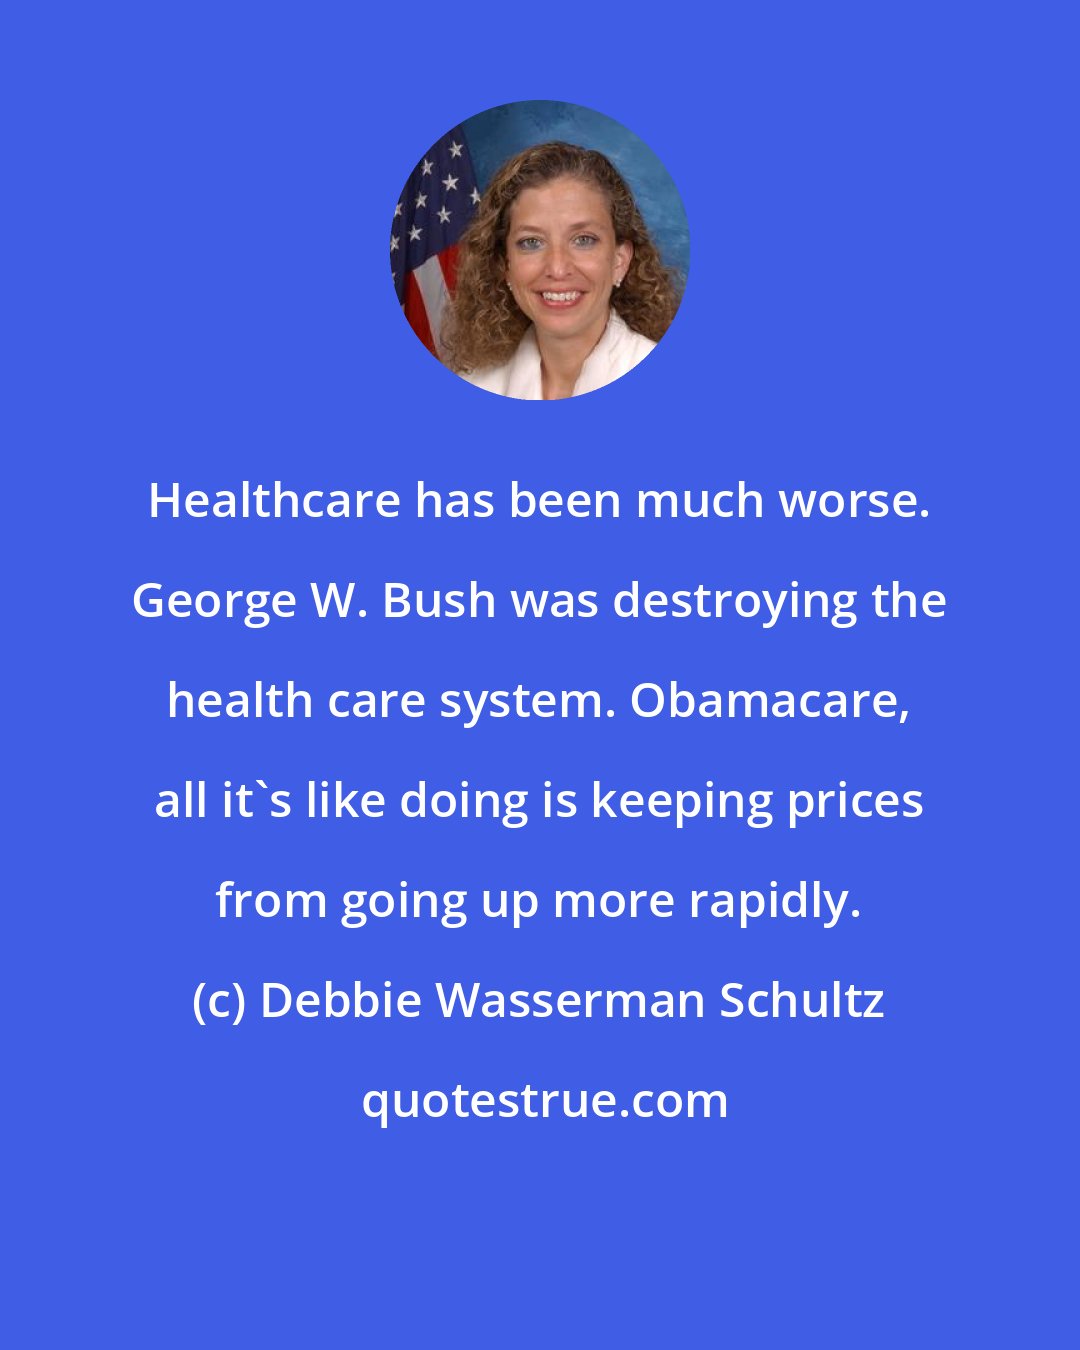 Debbie Wasserman Schultz: Healthcare has been much worse. George W. Bush was destroying the health care system. Obamacare, all it's like doing is keeping prices from going up more rapidly.